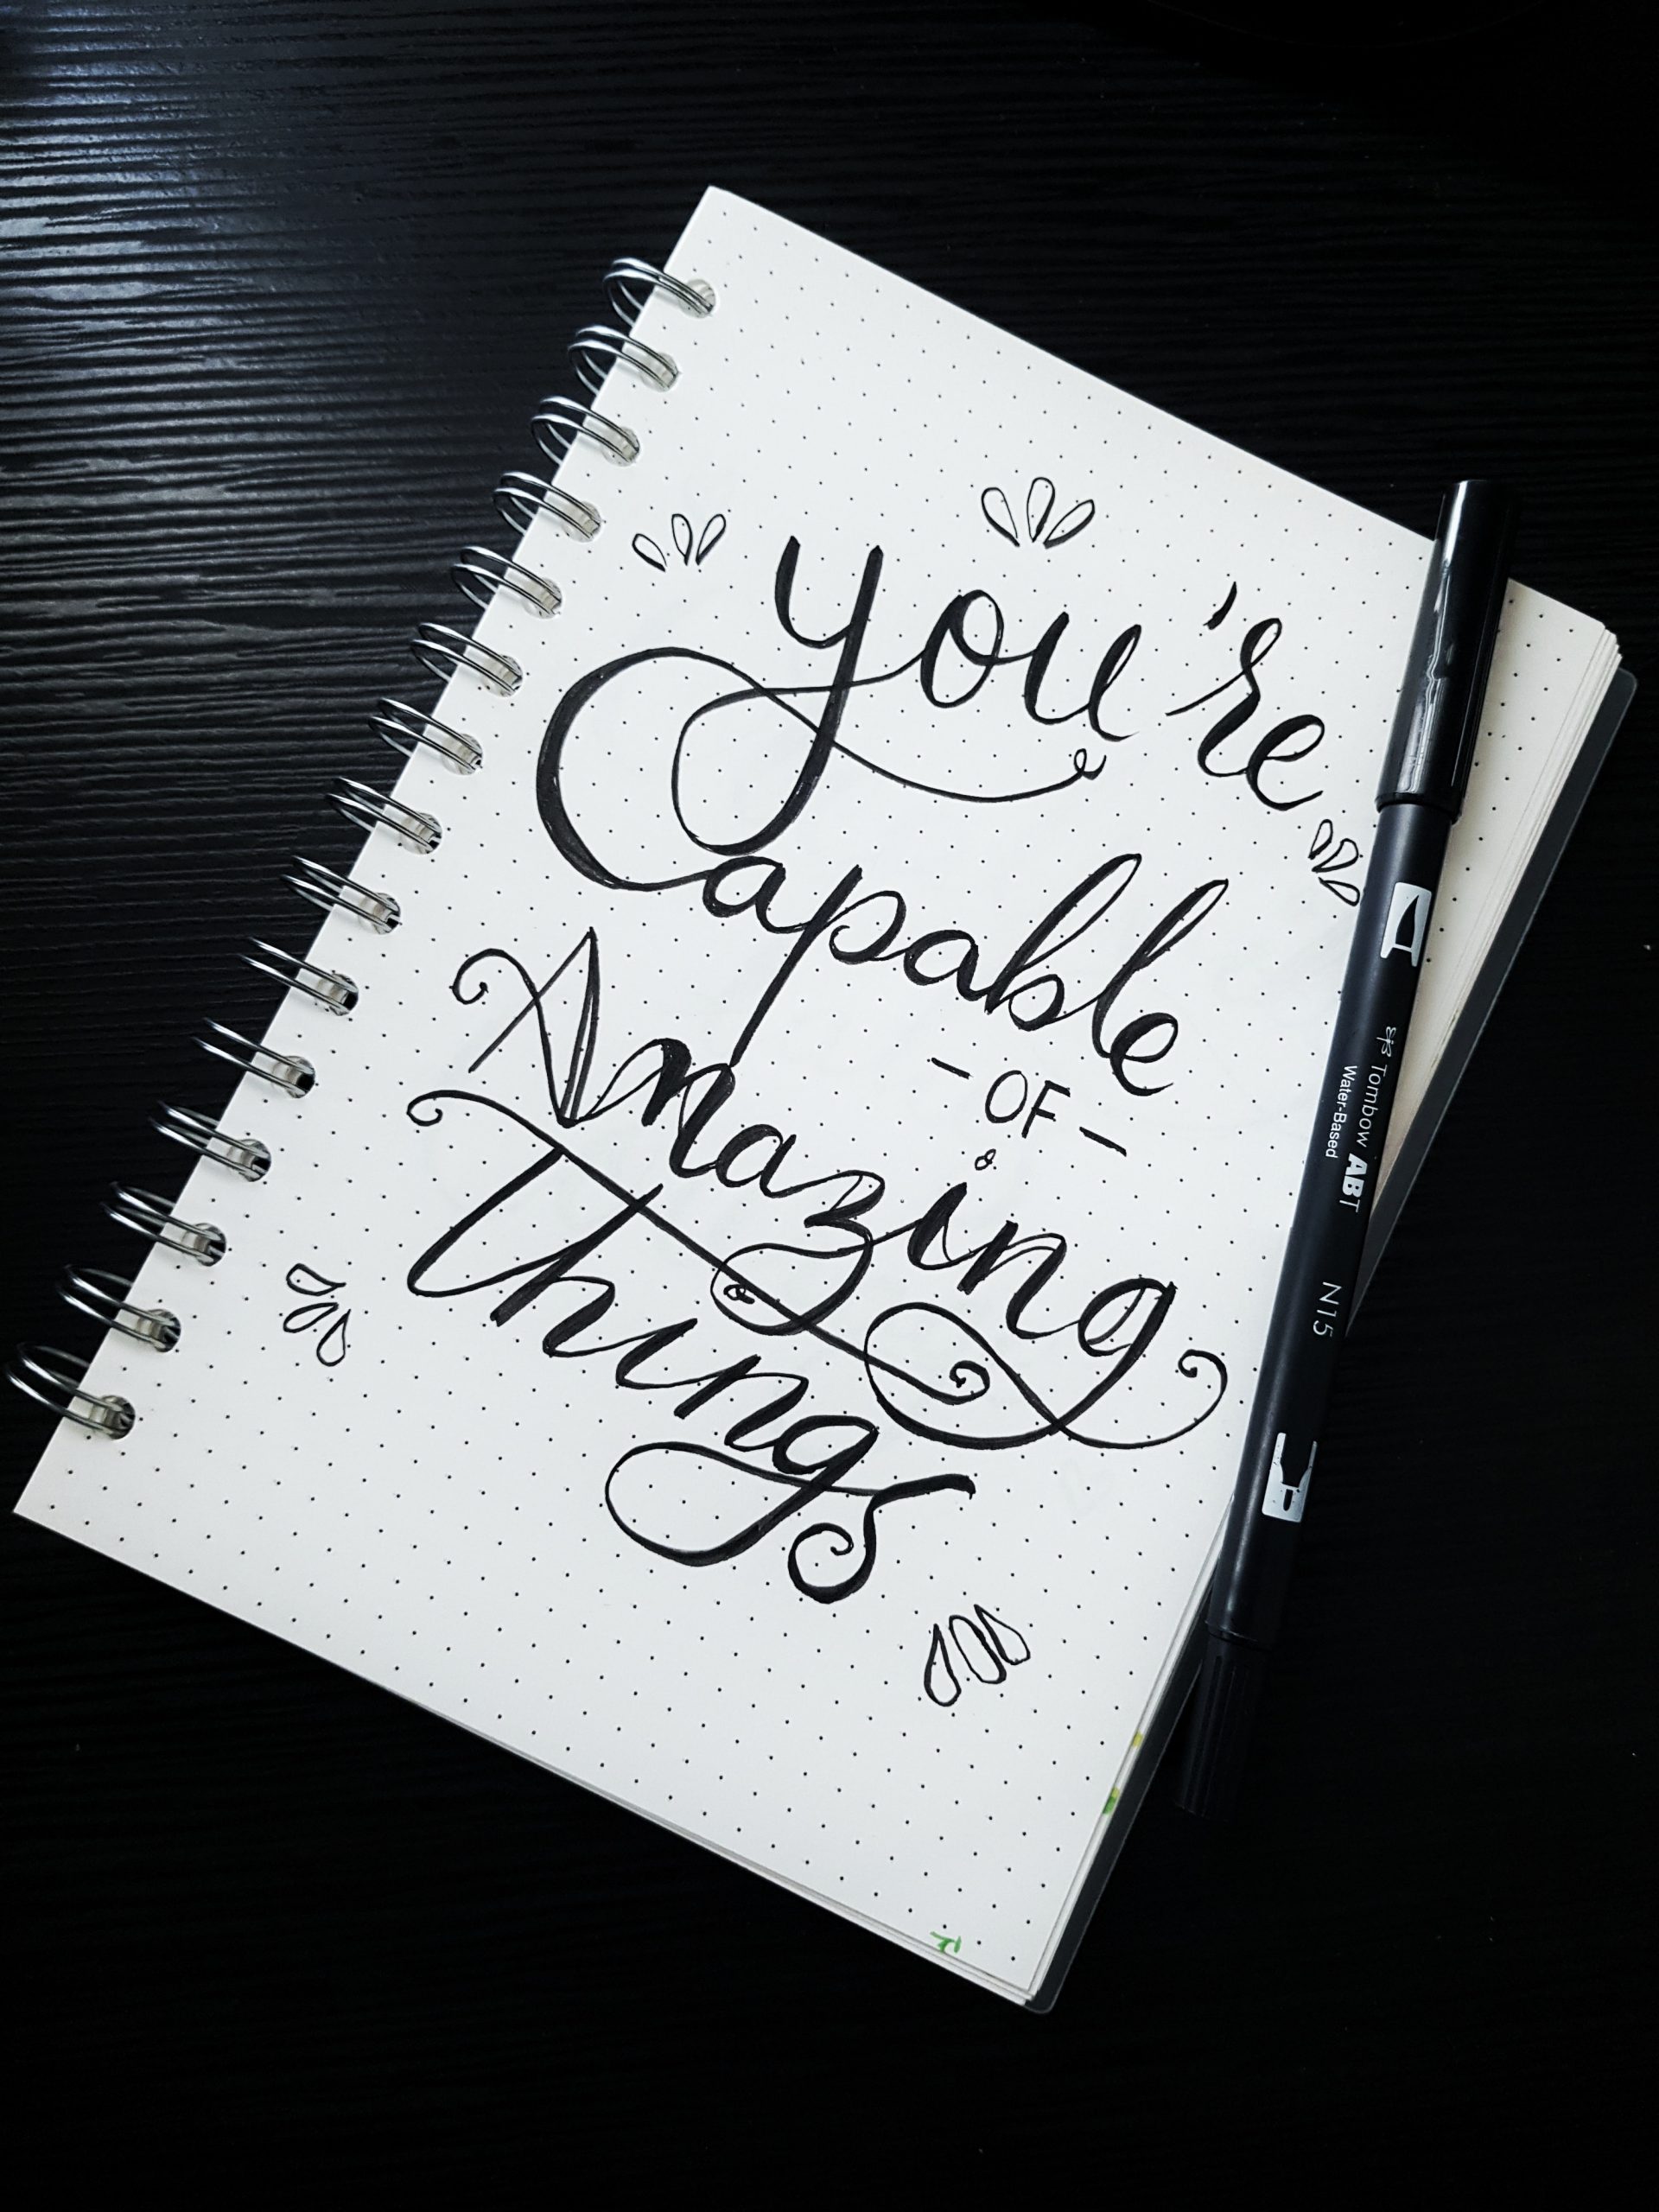 A picture of a notebook that says, "You're capable of amazing things."